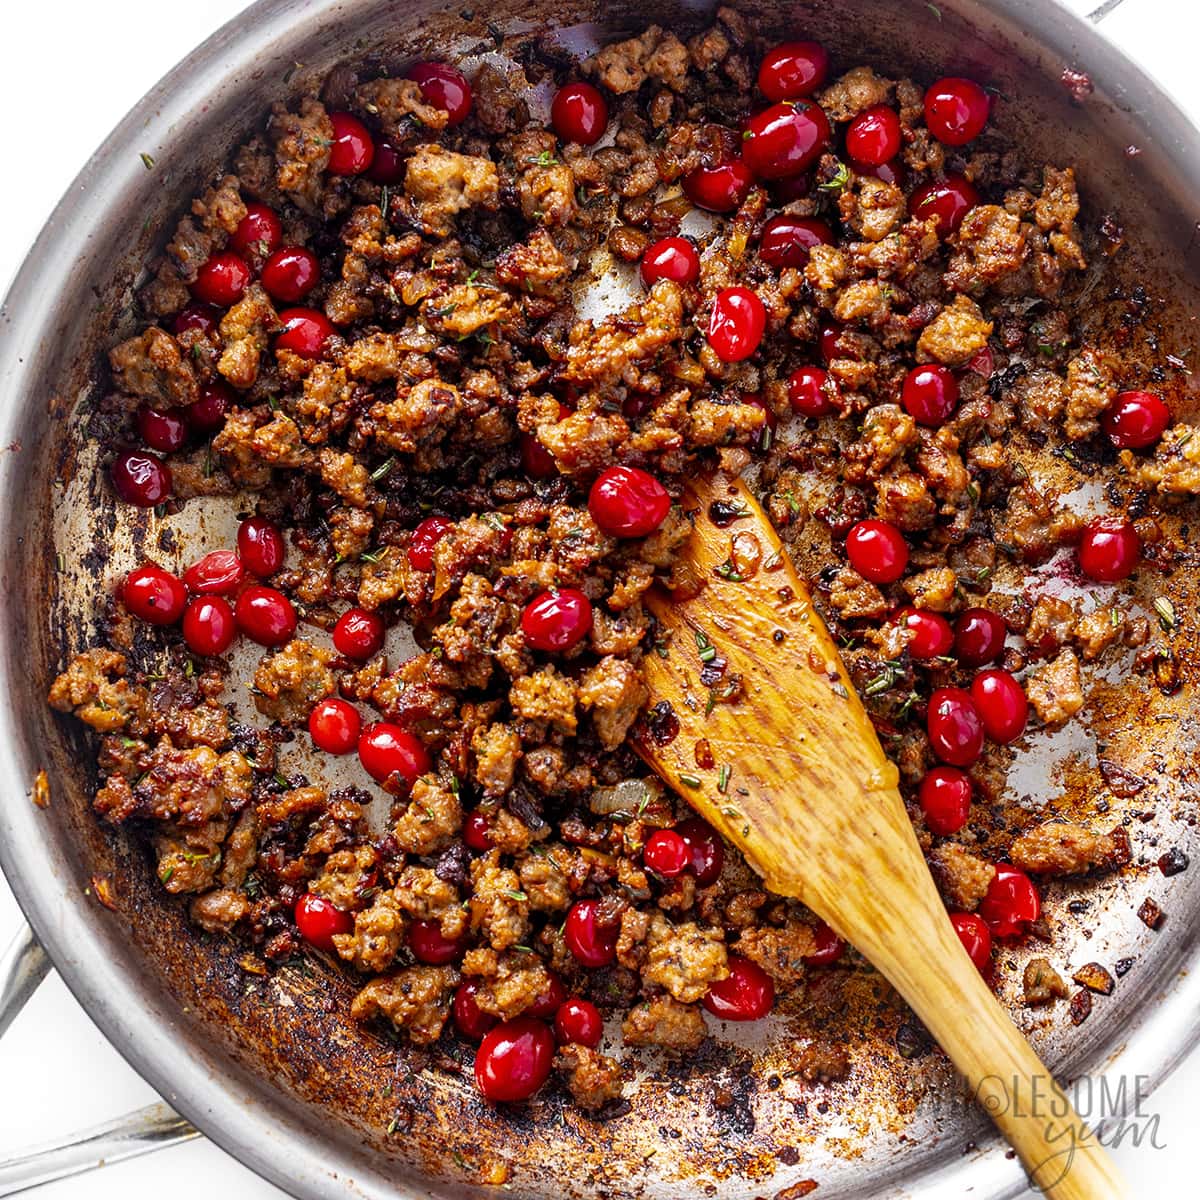 Cranberries and herbs added to sausage in a skillet.